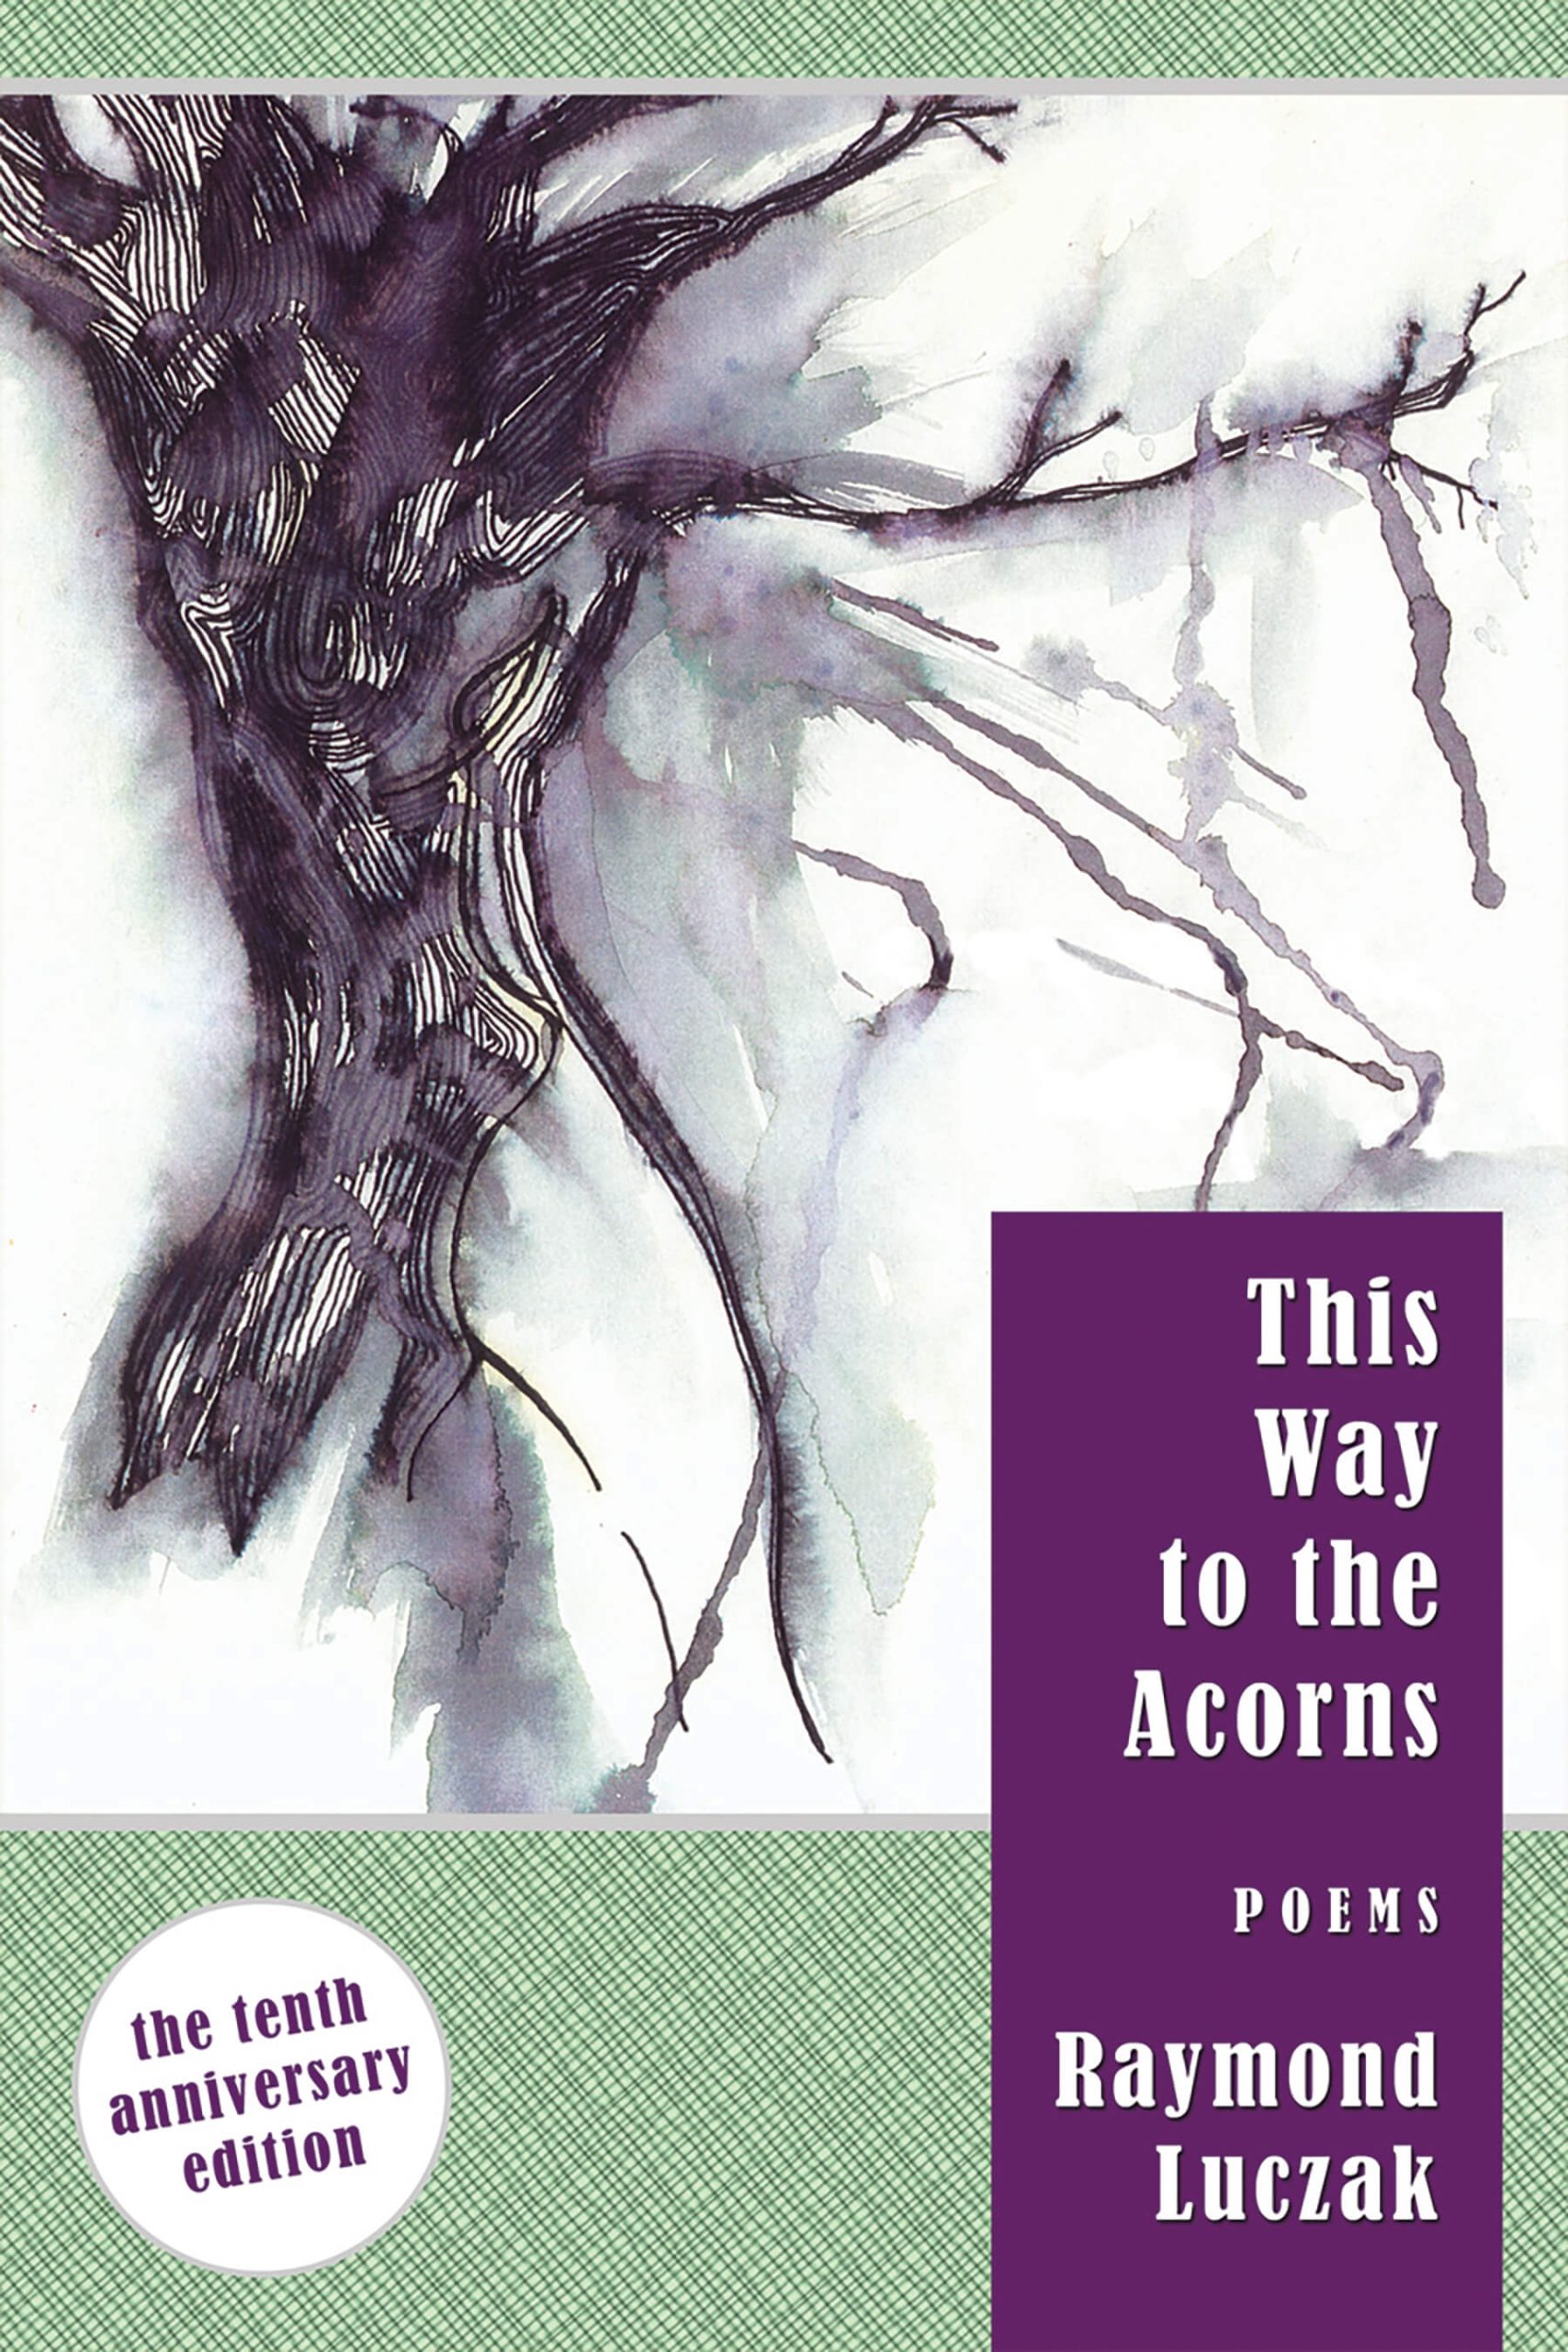 This Way to the Acorns: Poems (The Tenth Anniversary Edition)